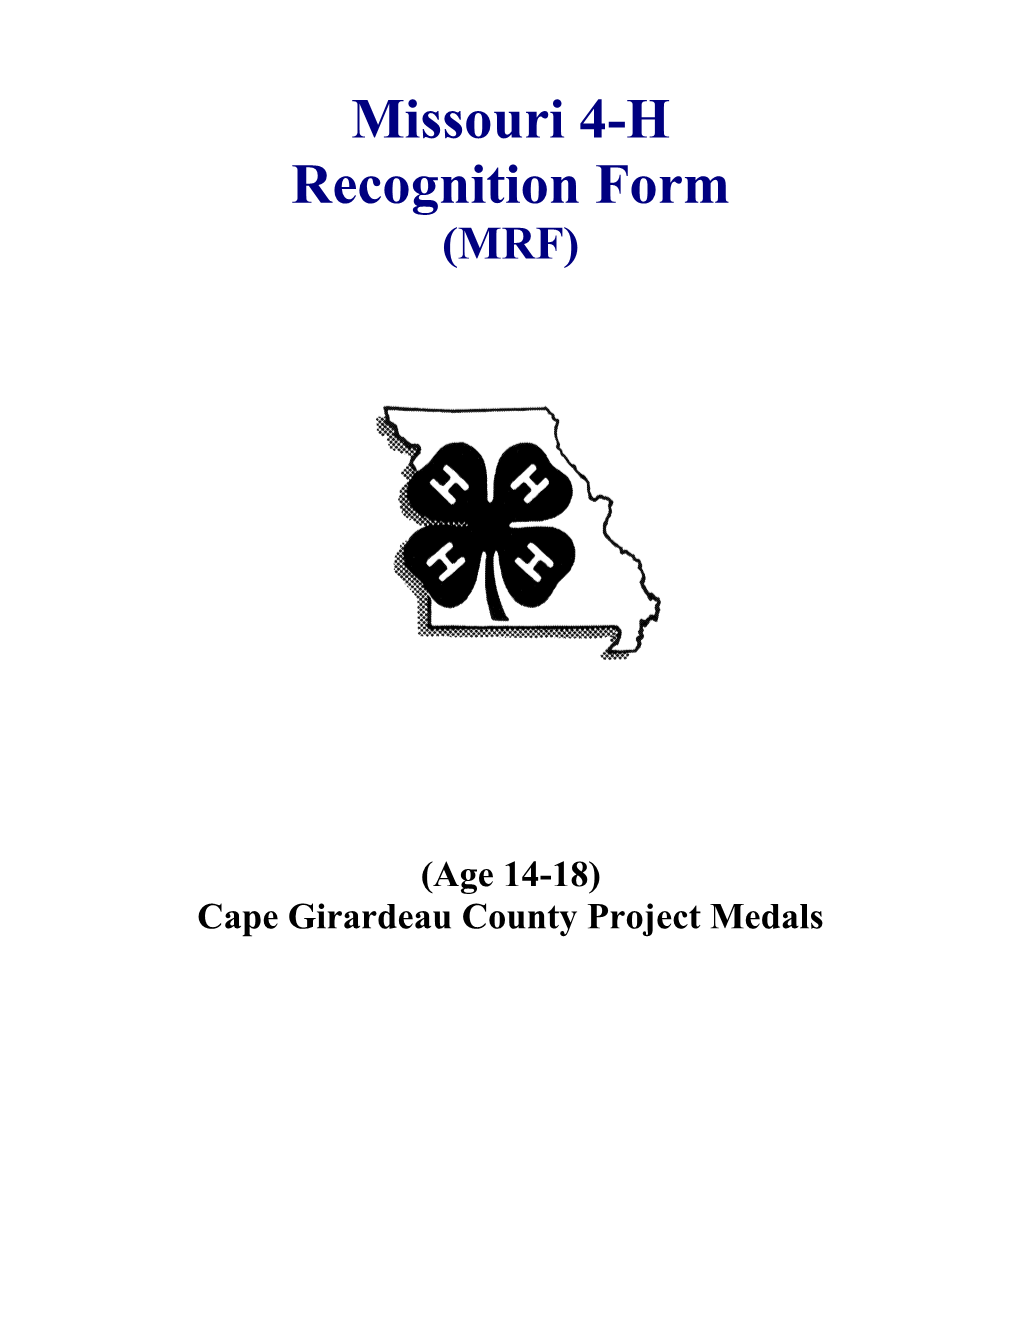 Cape Girardeau County Project Medals